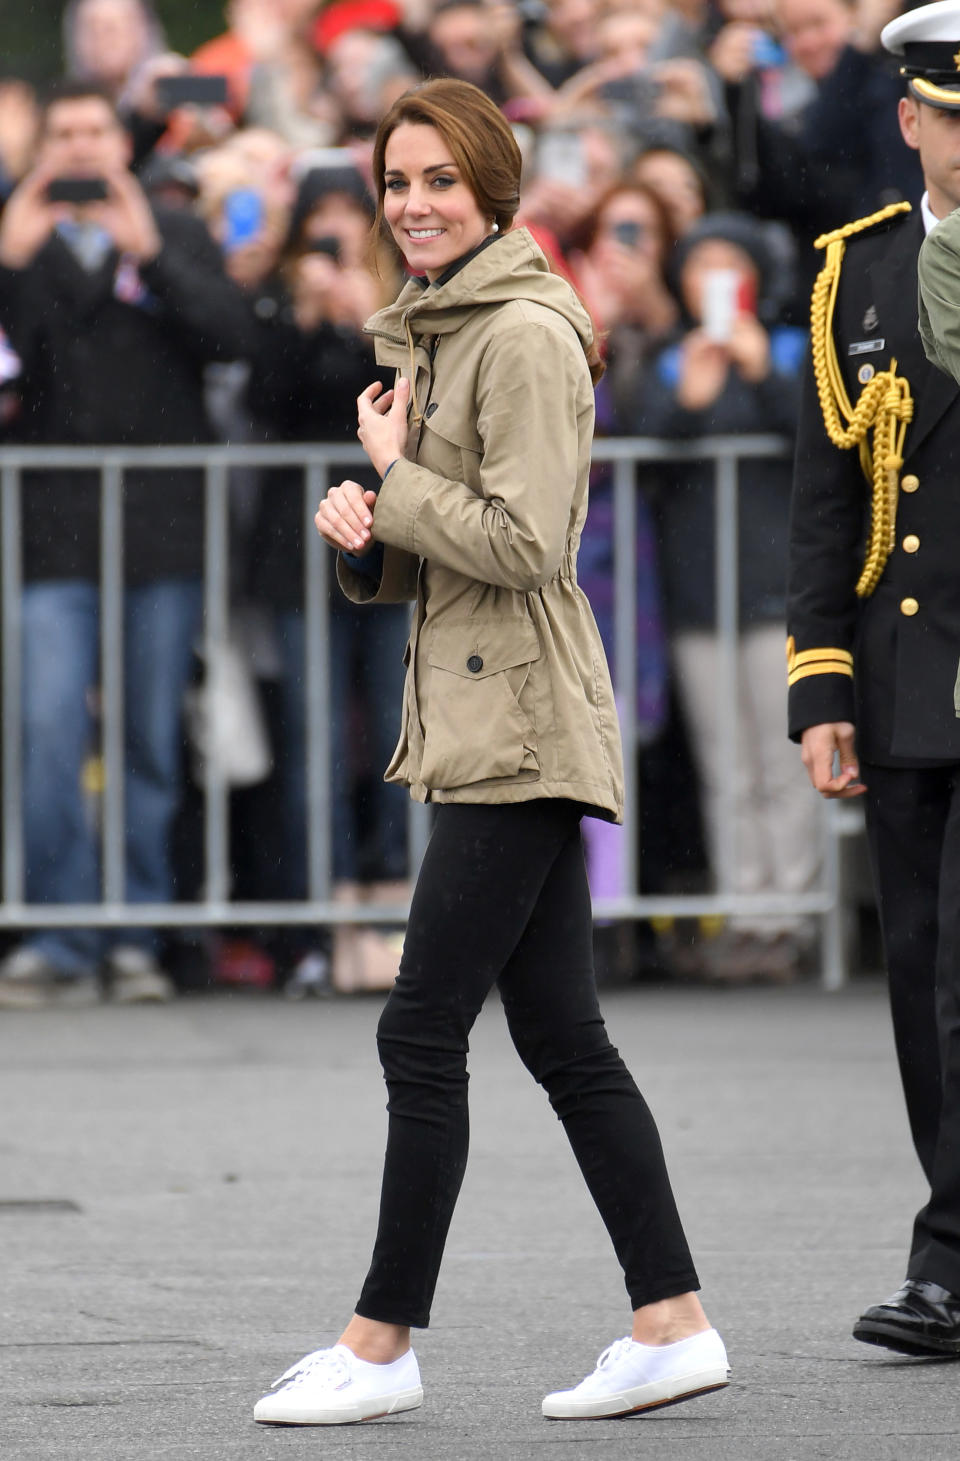 kate middleton wearing white superga sneakers, black skinny jeans, and a tan coloured jacket at an event